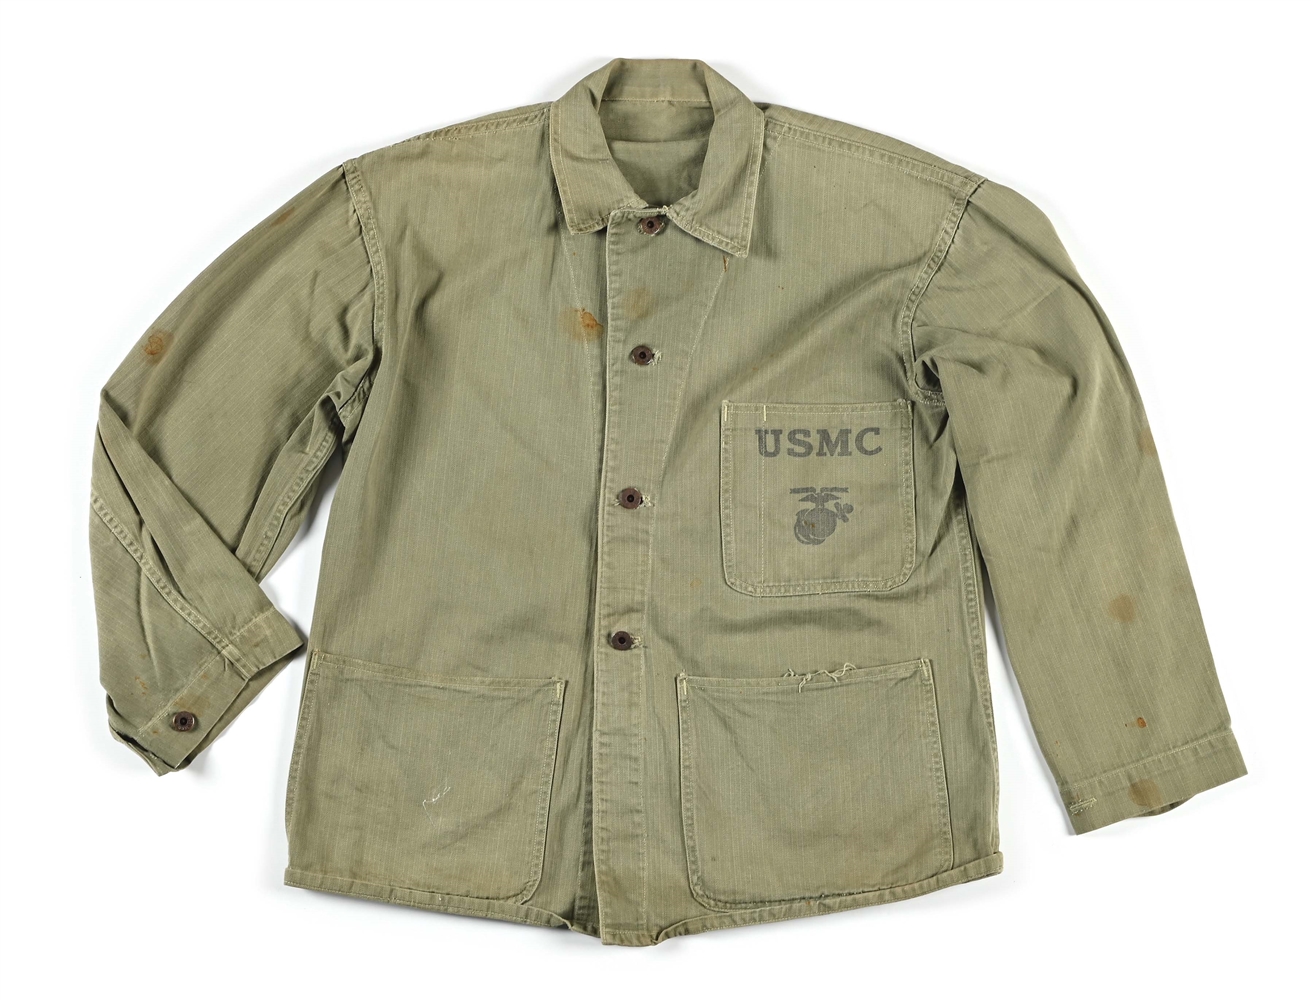 US WWII P41 FATIGUE JACKET NAMED TO CARL A. GOMOLL, BATTLE OF OKINAWA.